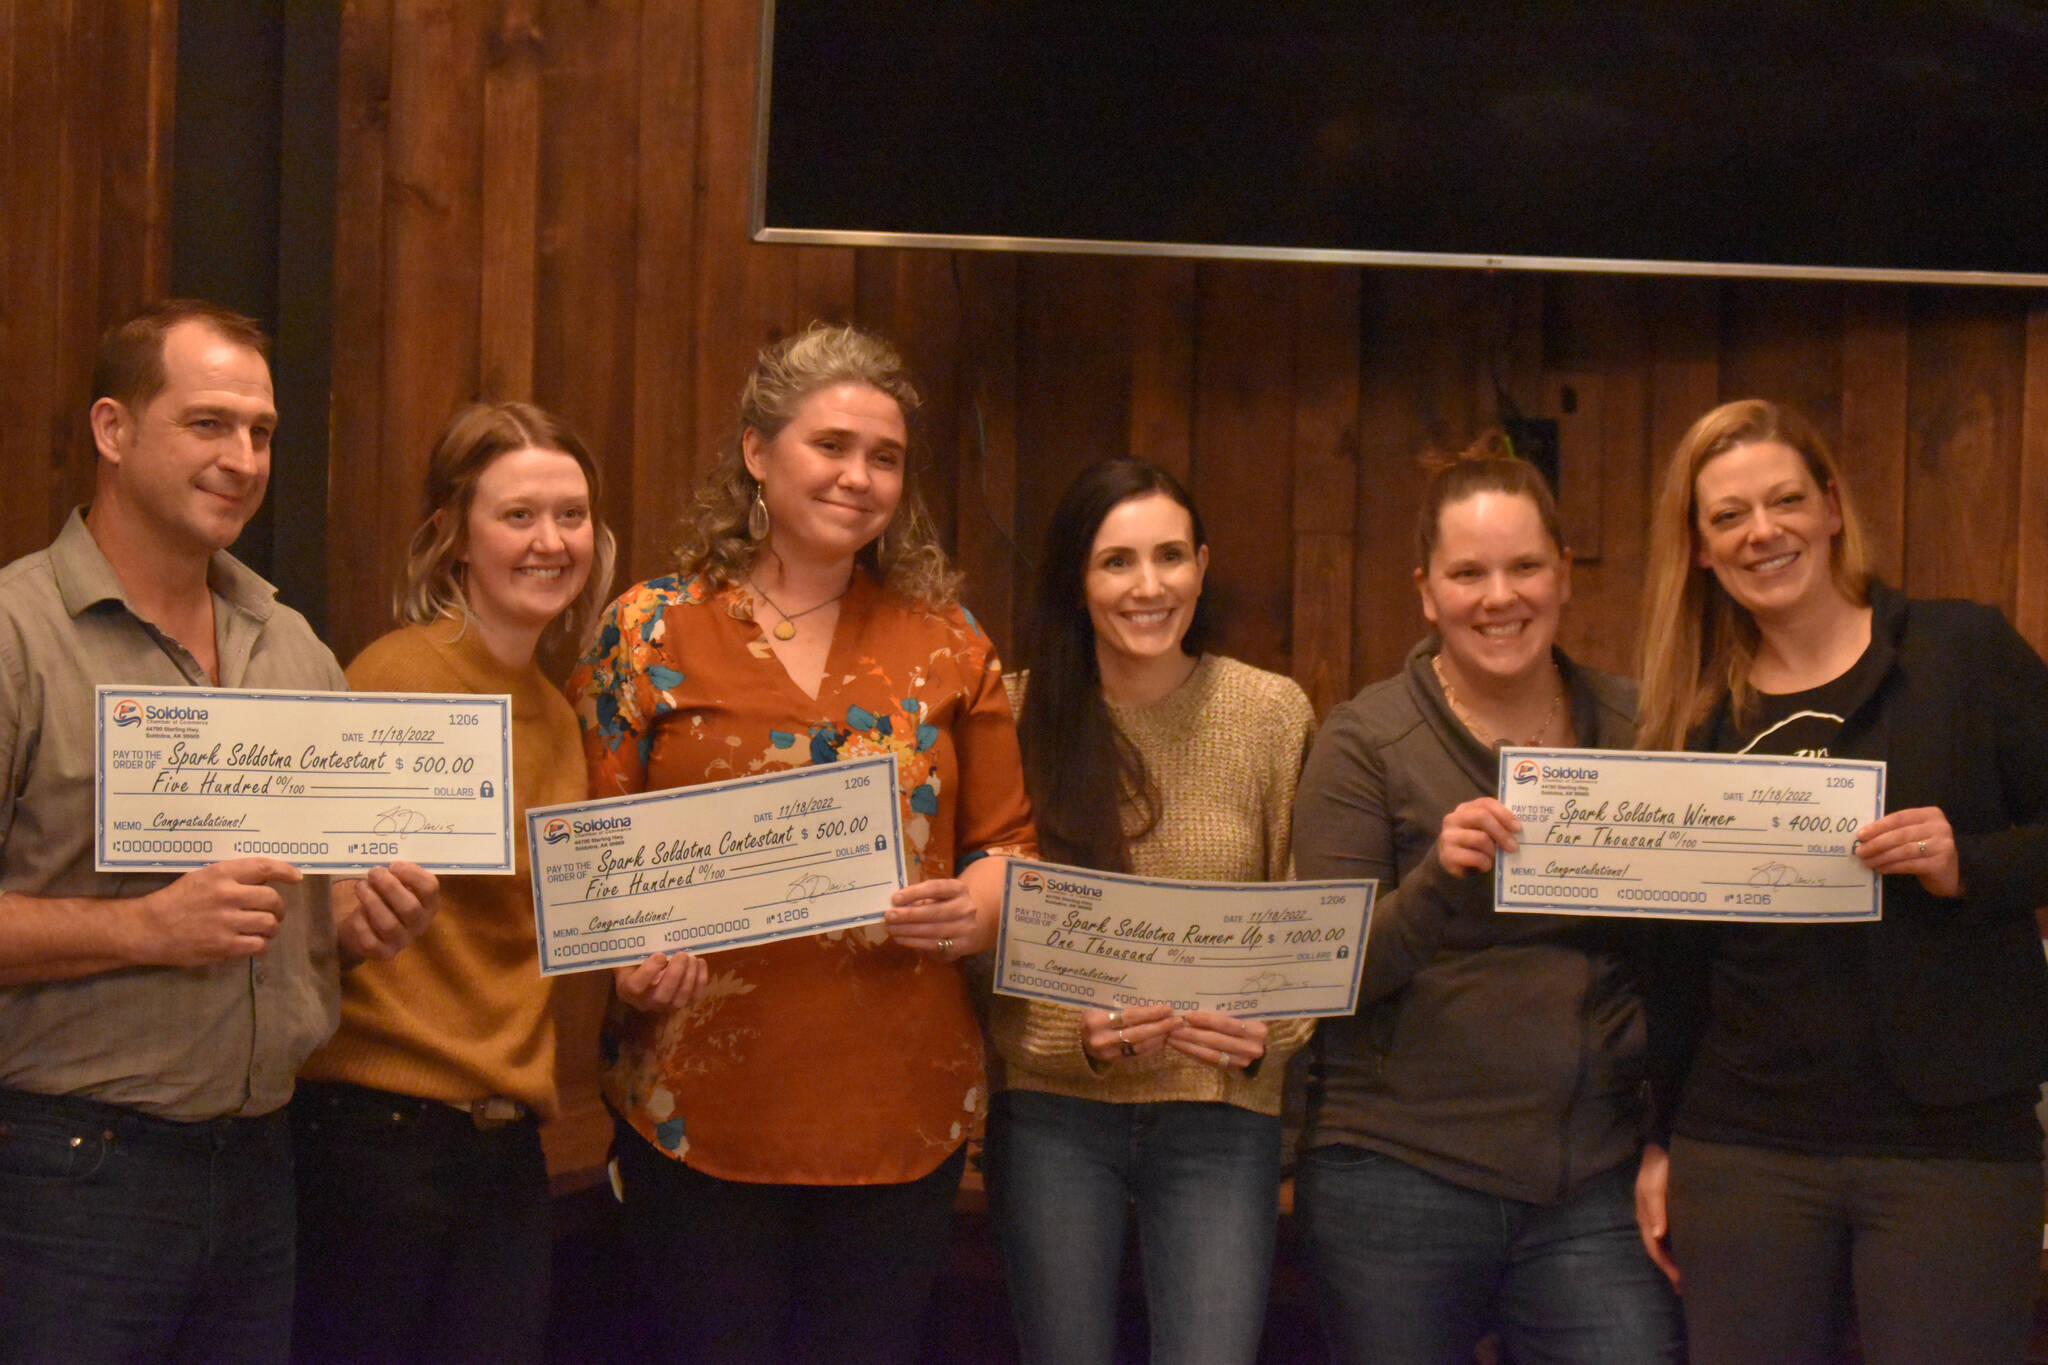 From left, contestants Richard C. Rogers, Anastasia Scollon, Willow King, JaNae Saltzgiver, Samantha Pyfer and Anna Mercier are seen with their winnings at the Spark Soldotna Shark Tank Event on Friday, Nov. 18, 2022, at The Lone Moose Lodge in Soldotna, Alaska. (Jake Dye/Peninsula Clarion)